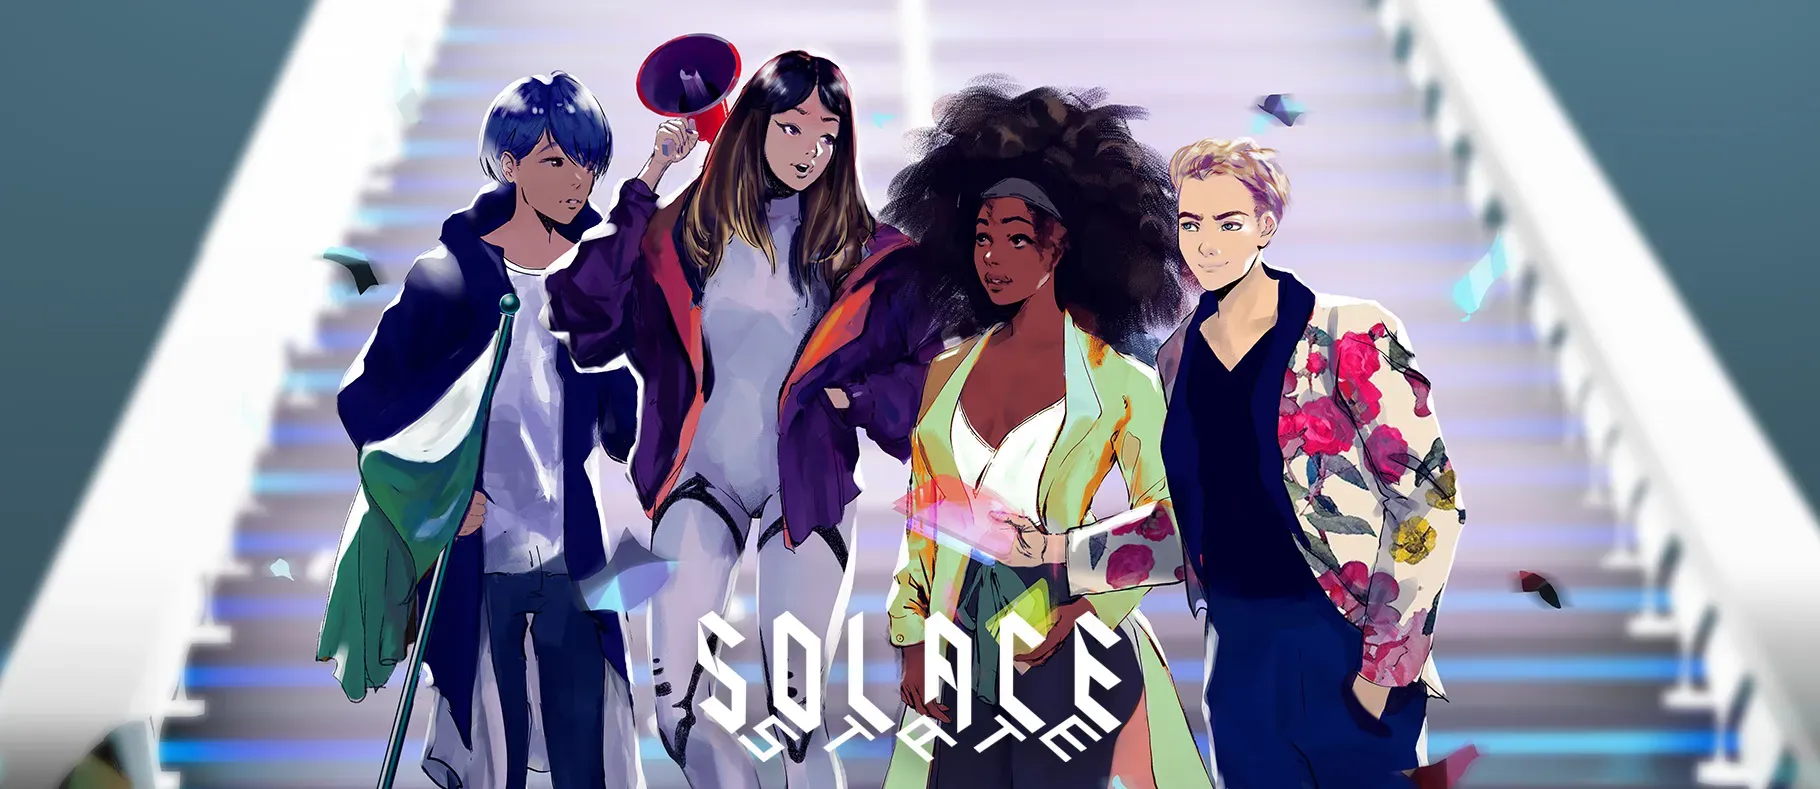 Solace State: A Deep Dive into Emotional Cyberpunk Stories by Vivid Foundry